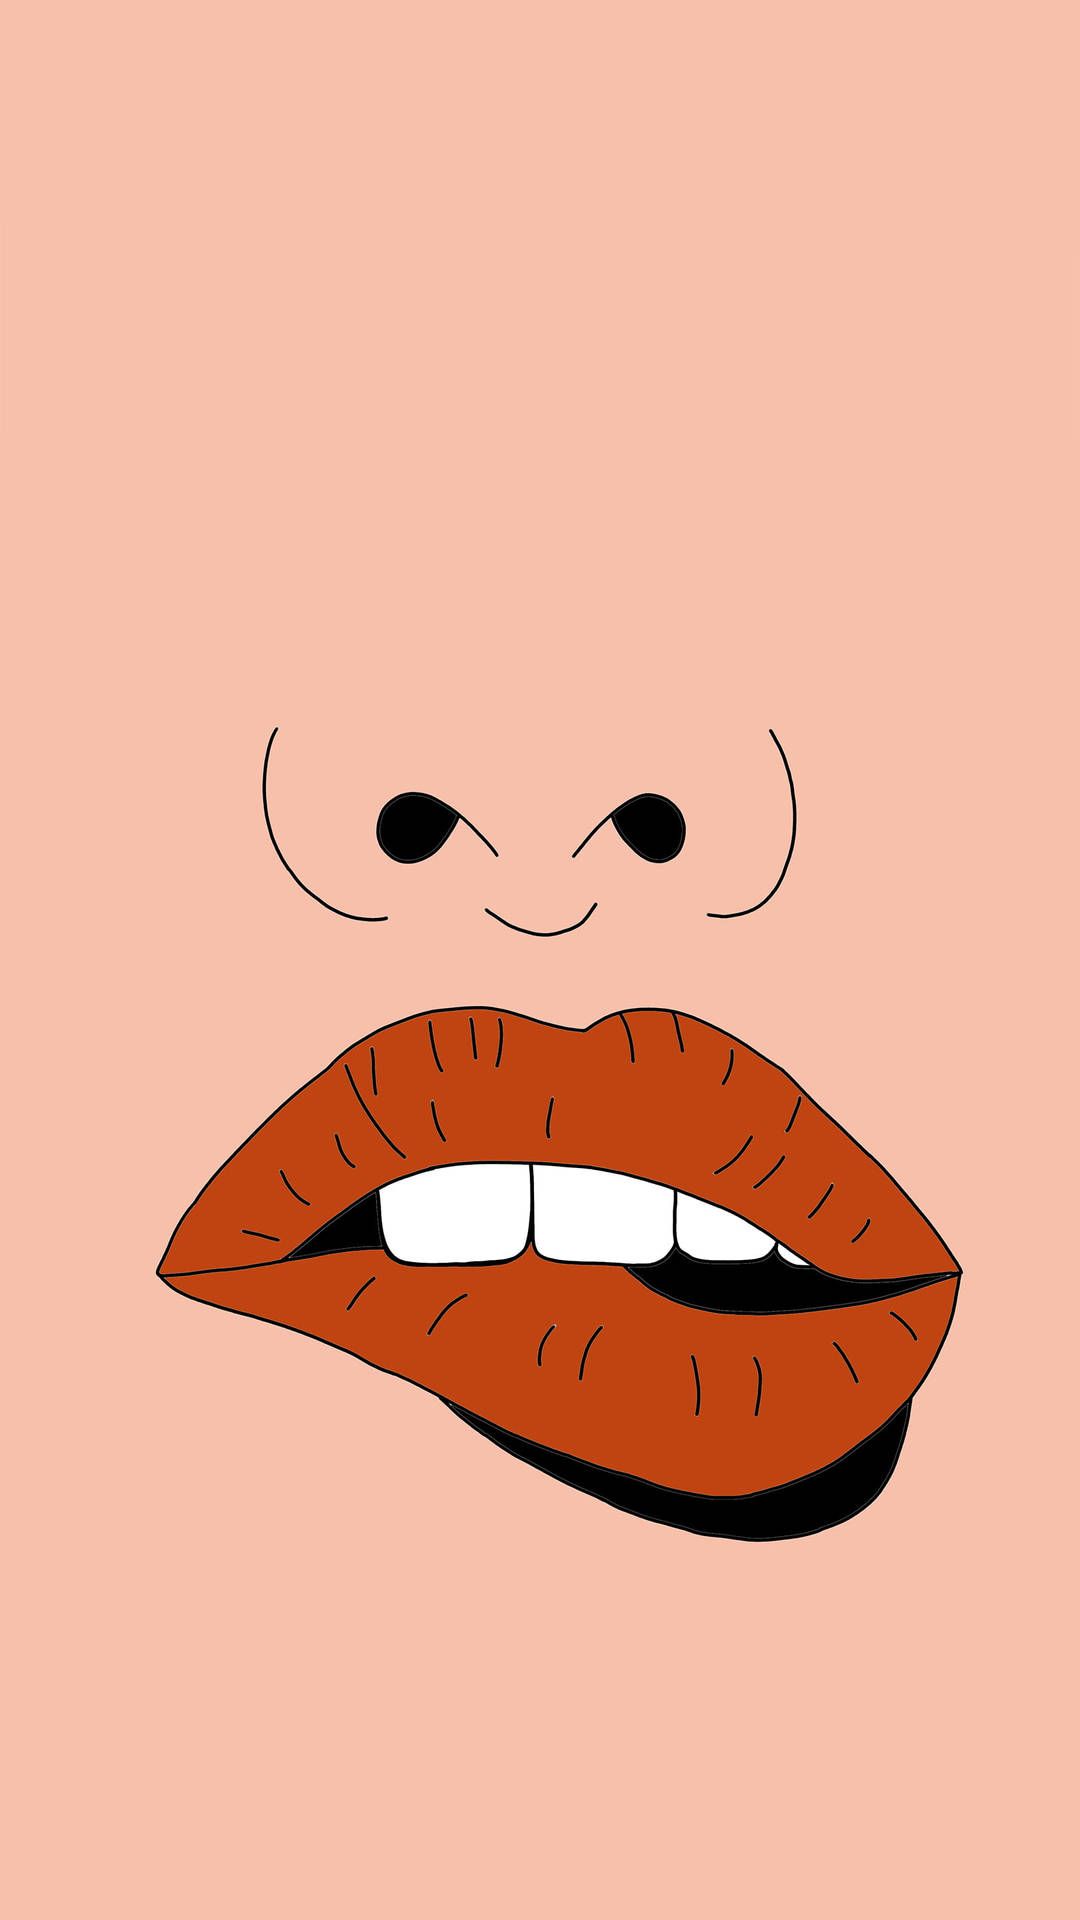 IPhone wallpaper of a cartoon mouth with red lips and a nose on a pink background - Lips